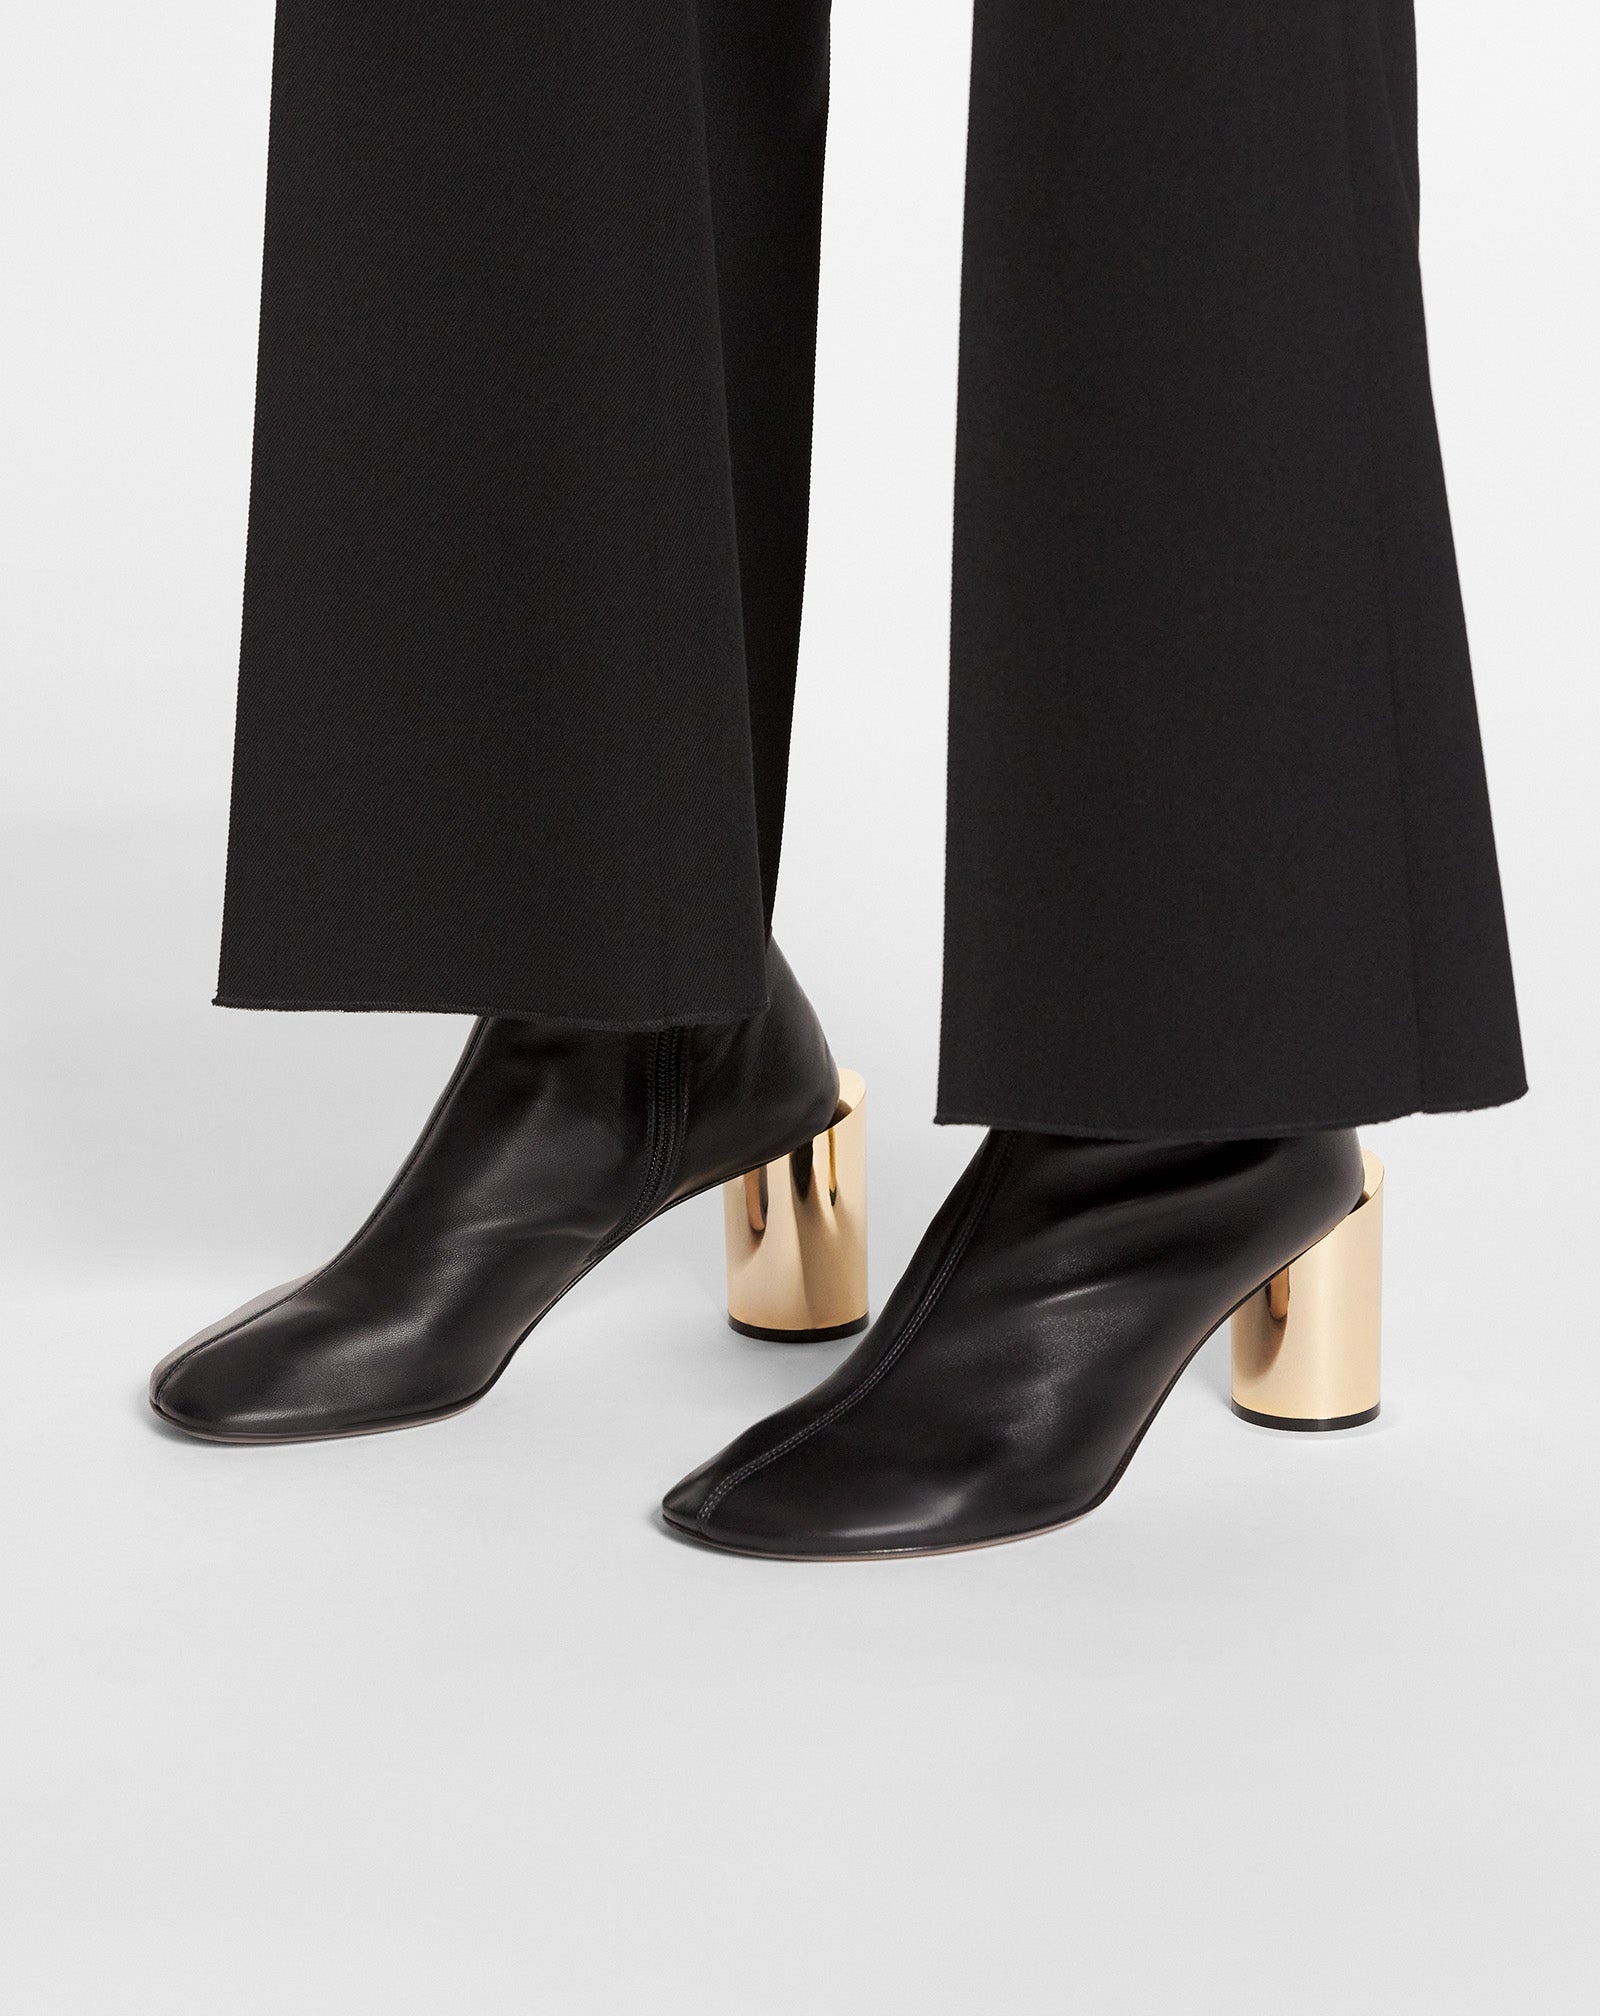 LEATHER SEQUENCE BY LANVIN CHUNKY HEELED BOOTS - 3